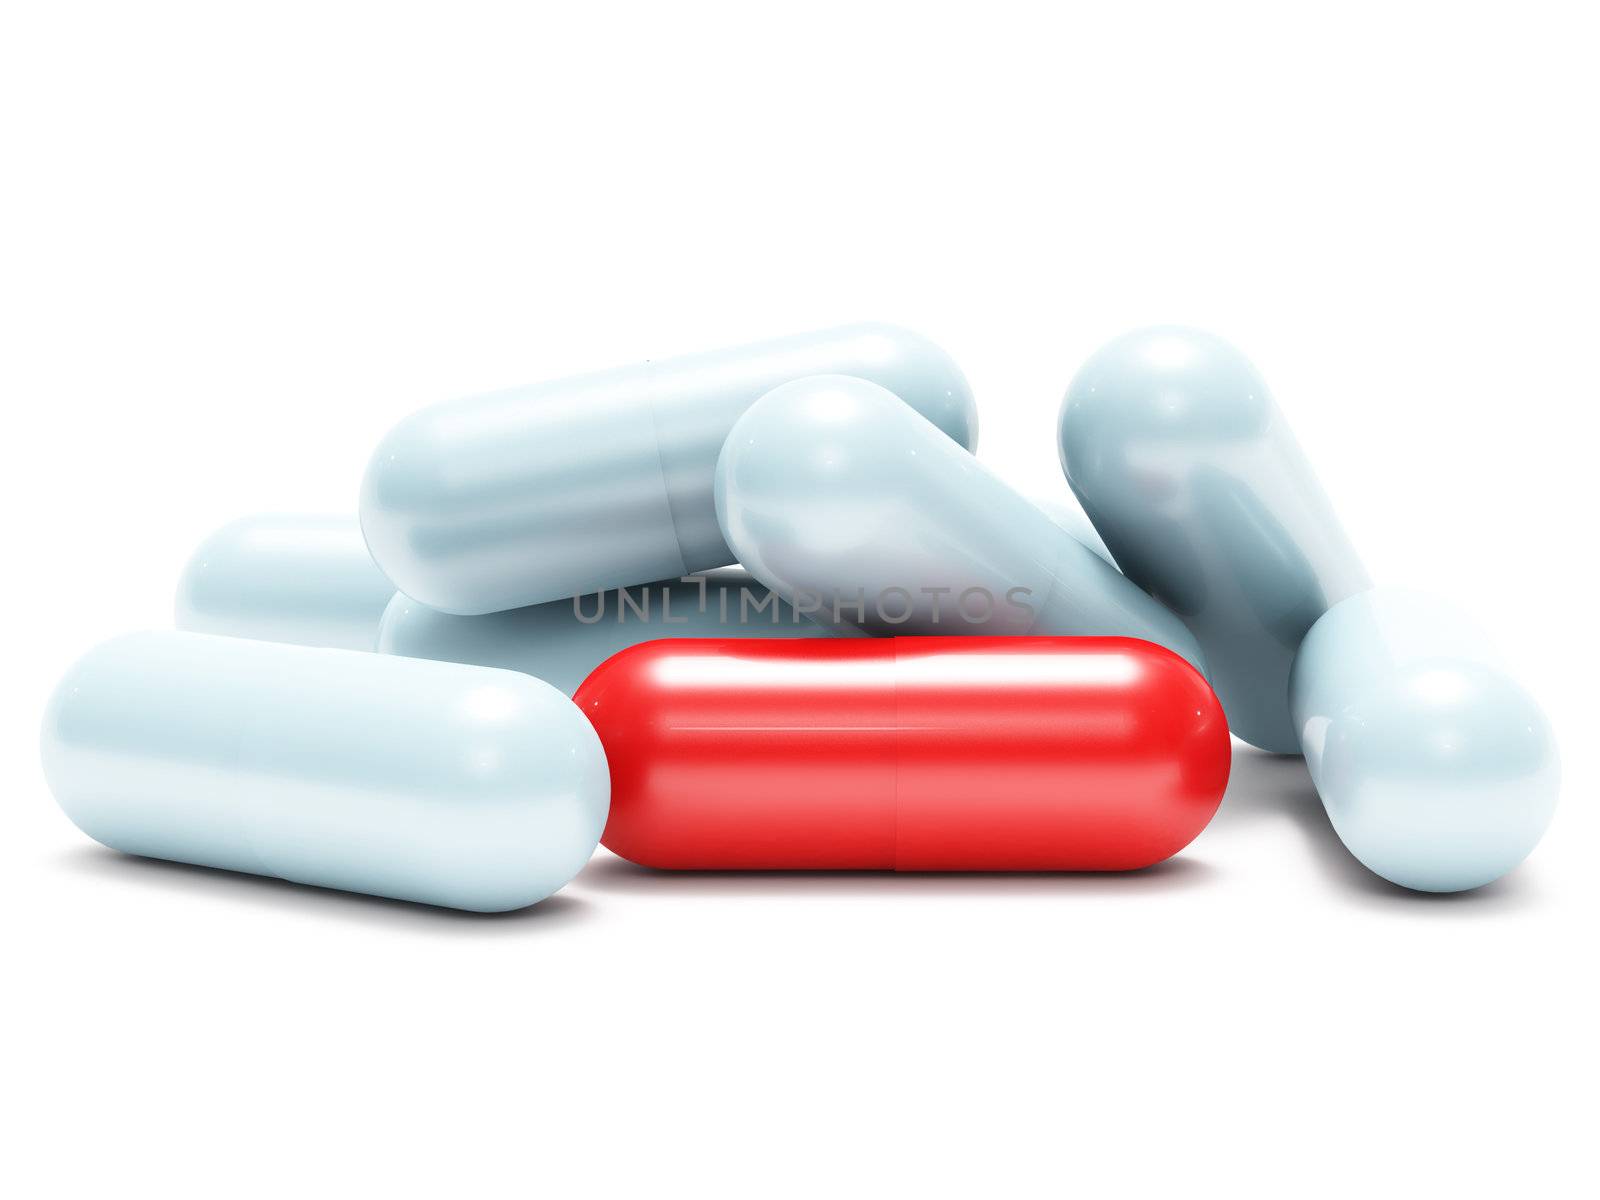 Many white and one red shiny pills (medical capsule) by maxkabakov